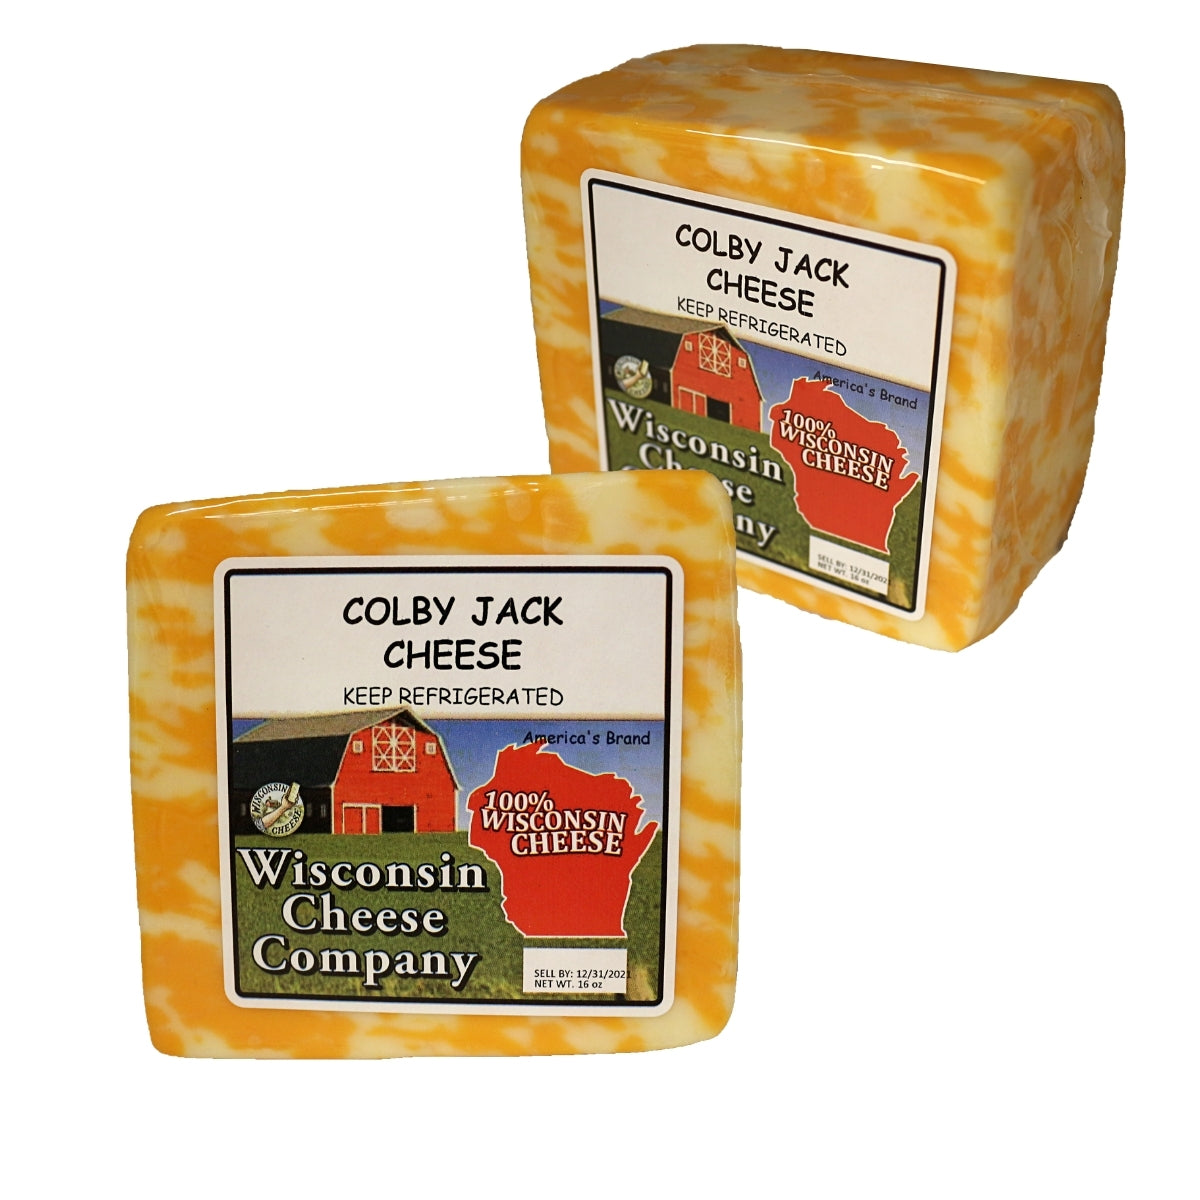 Two blocks of Colby Jack Cheese